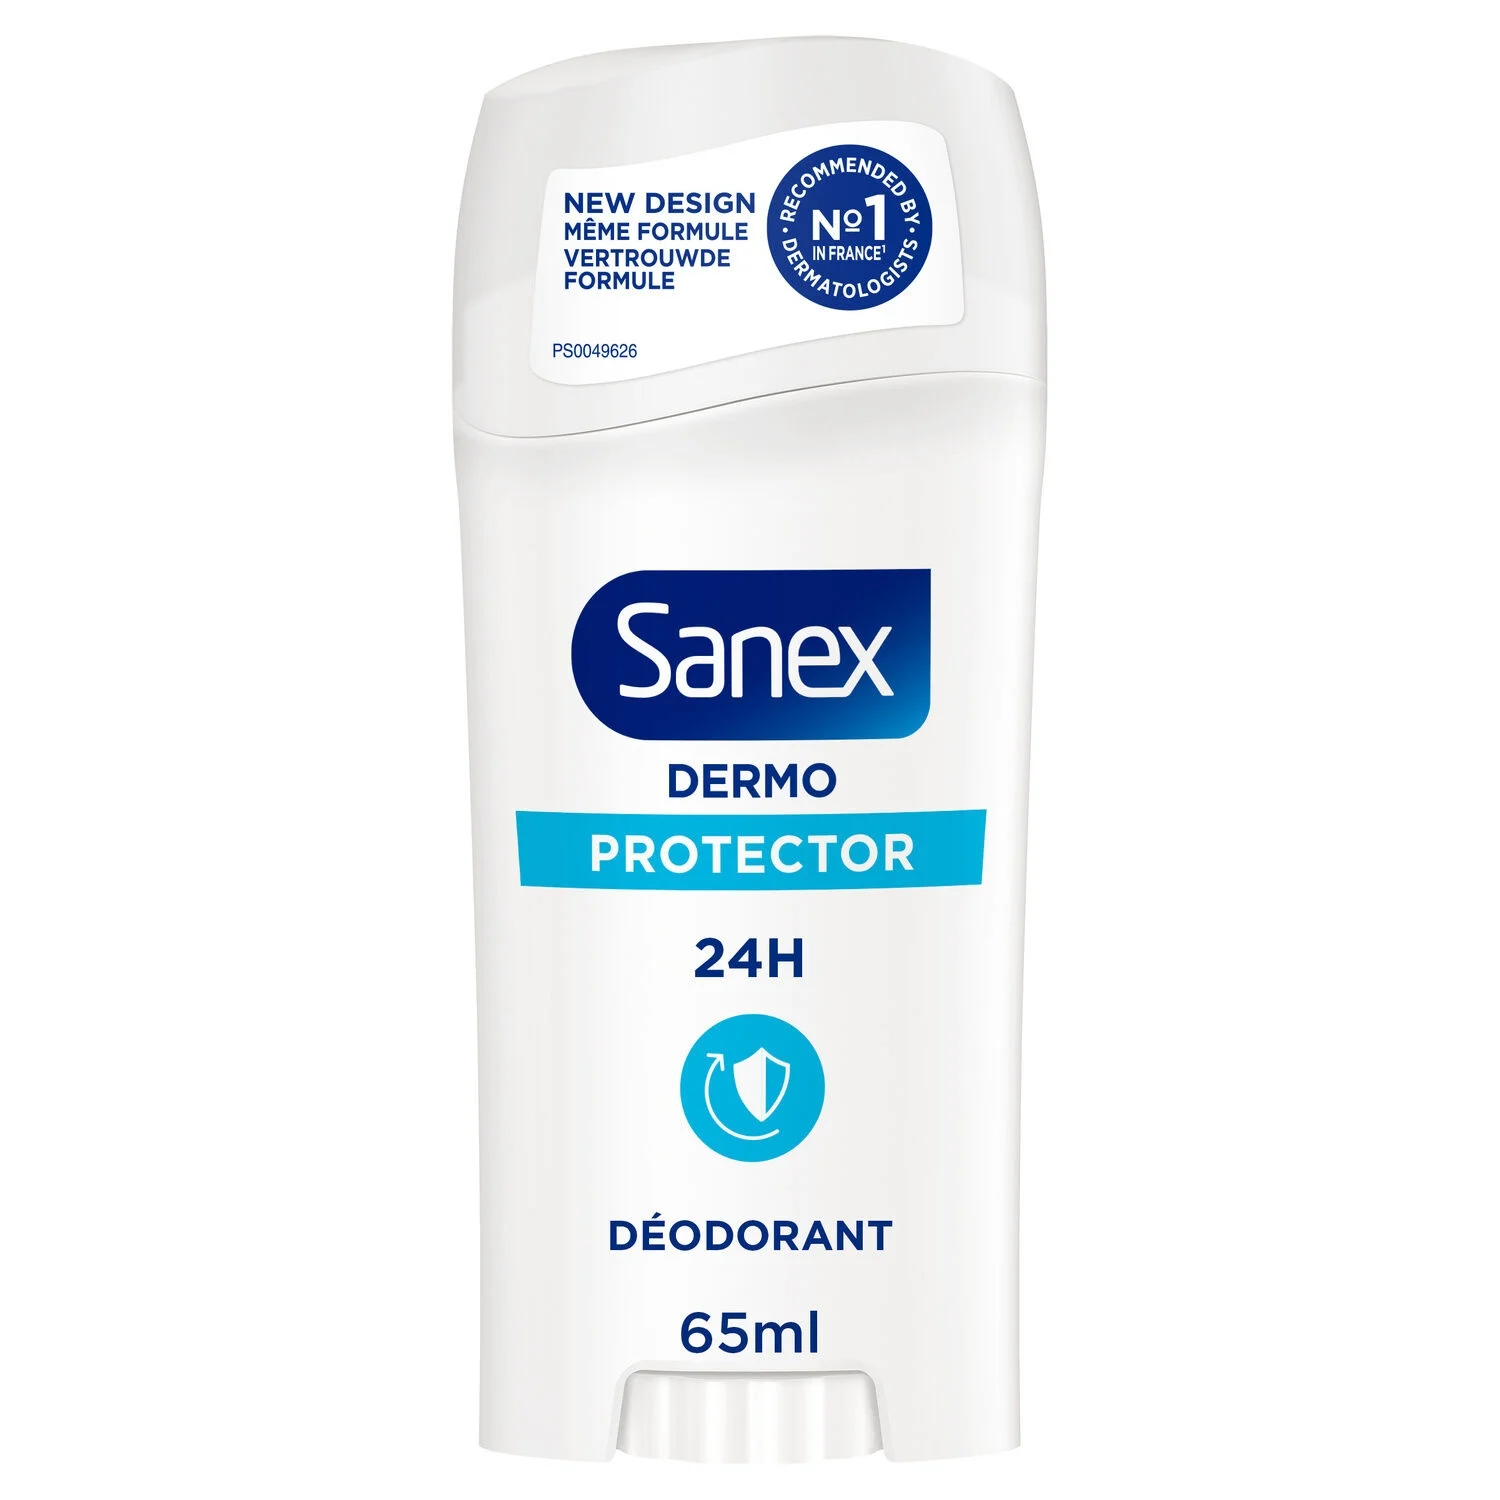 Snx Deo Stick Protector 65ml